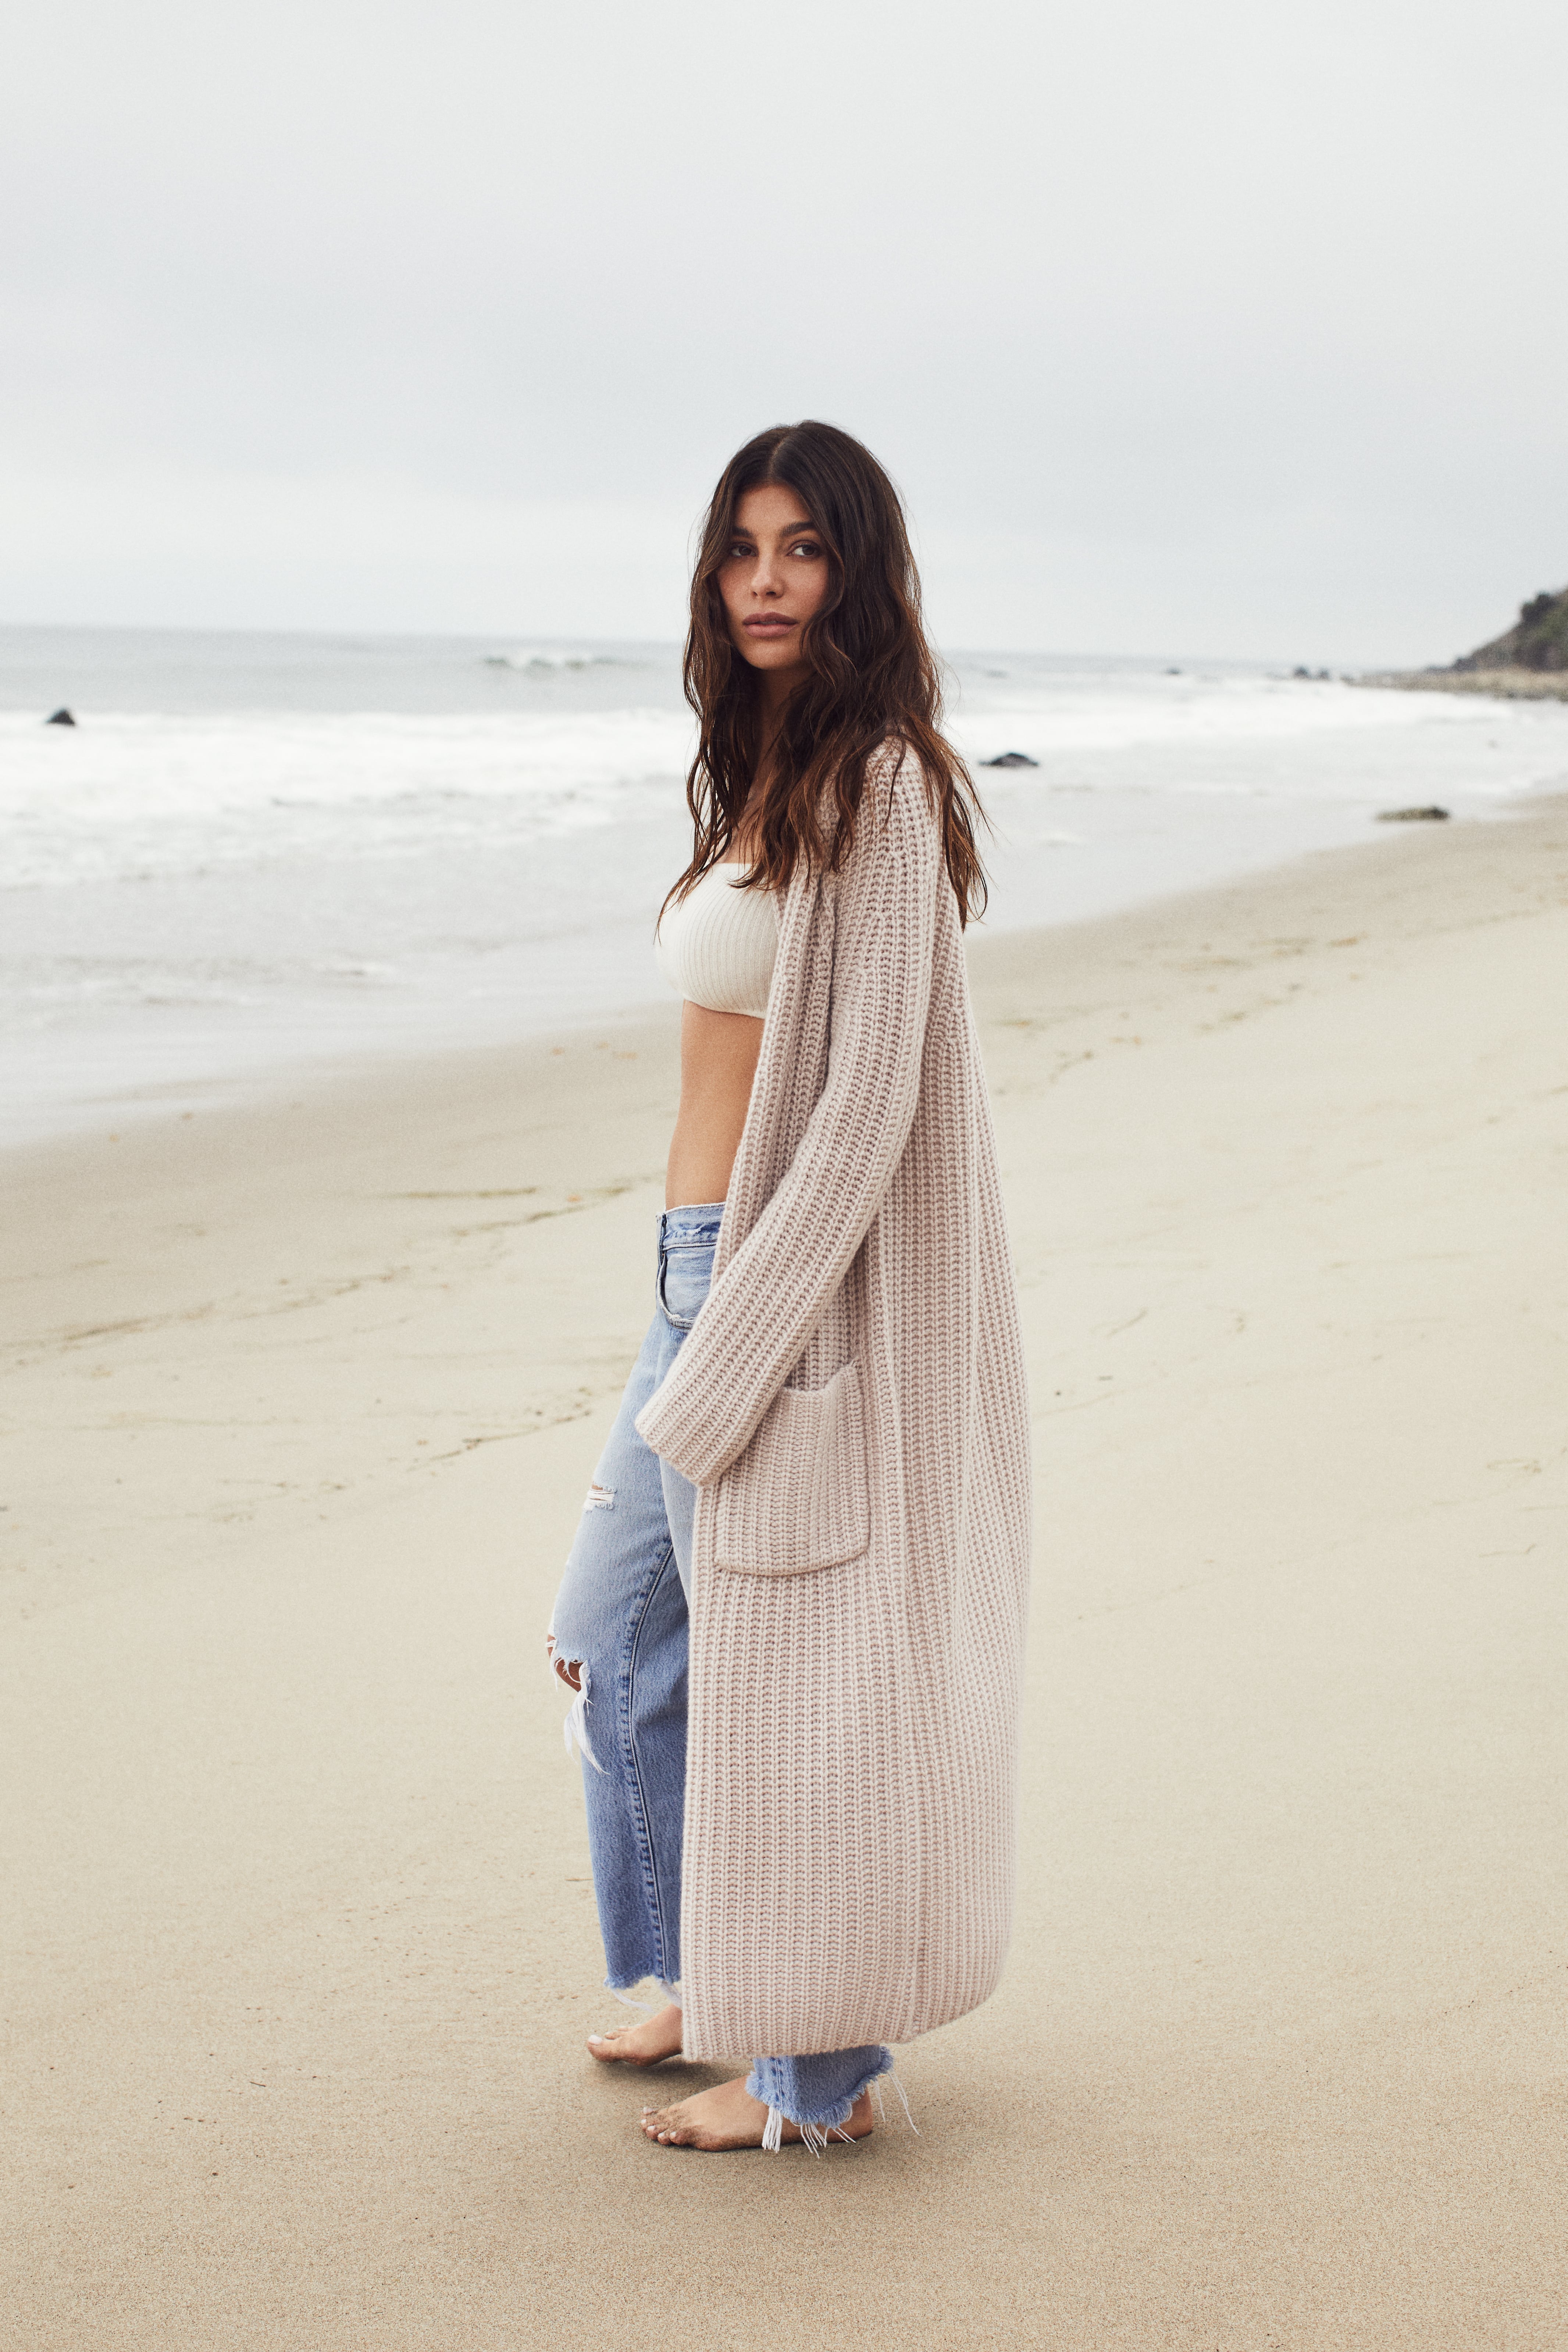 Camila Morrone looks chic in a beige turtleneck sweater and black